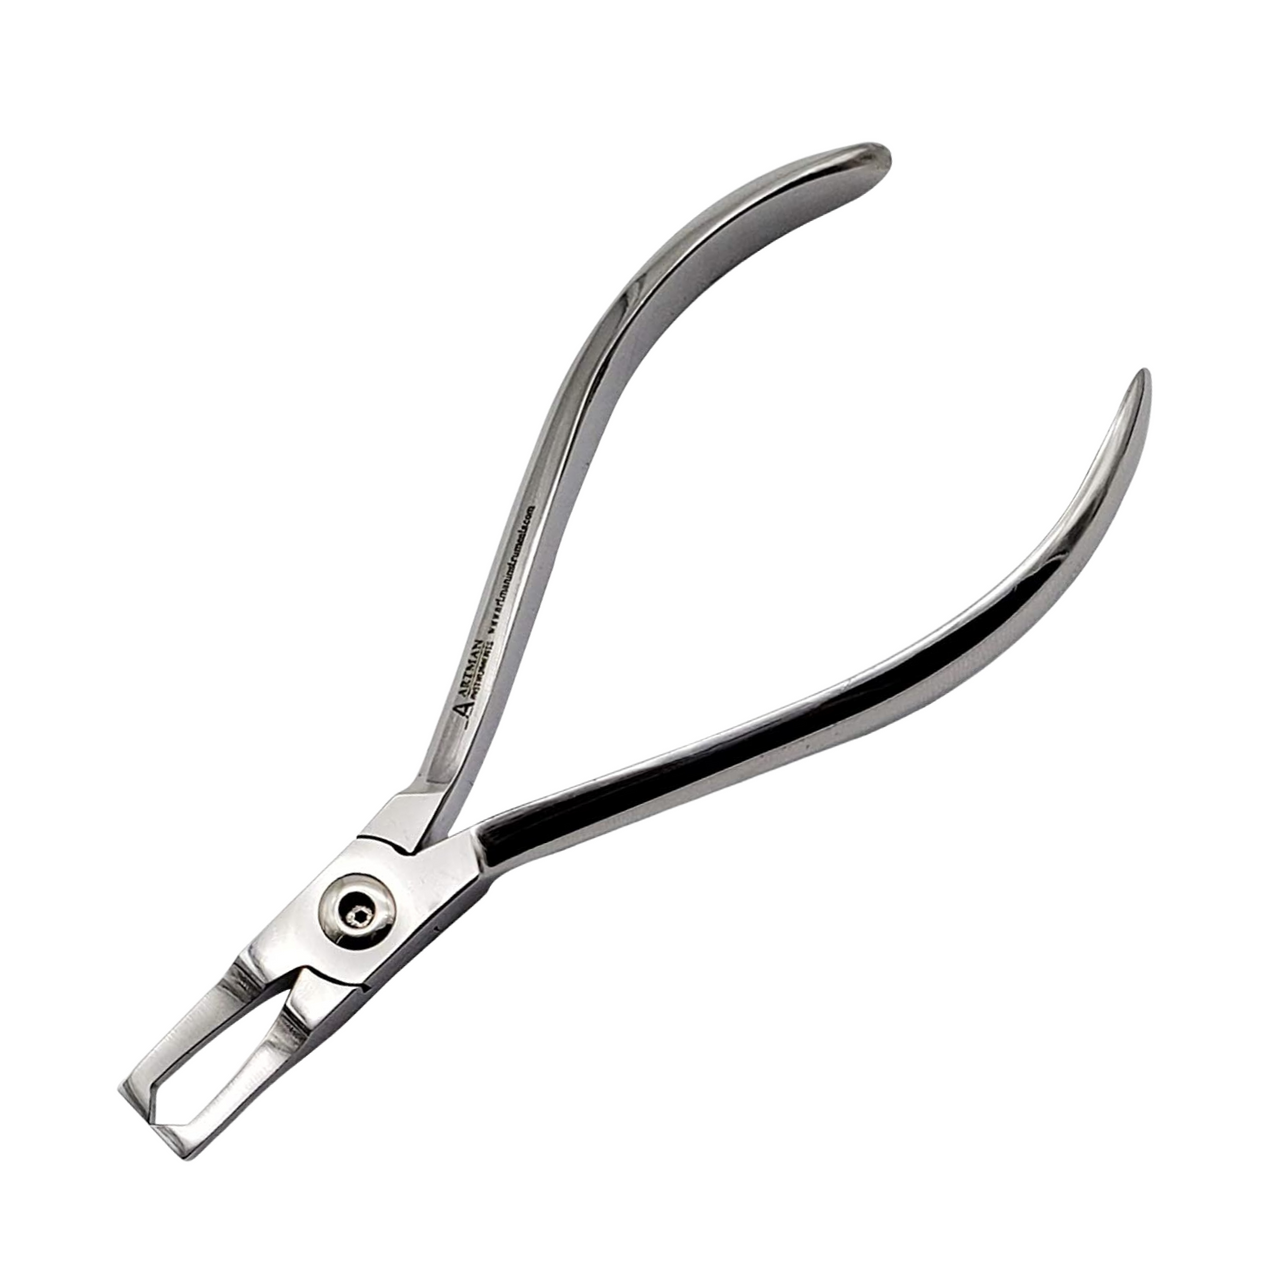 Bracket Removing Pliers with tungsten carbide tip